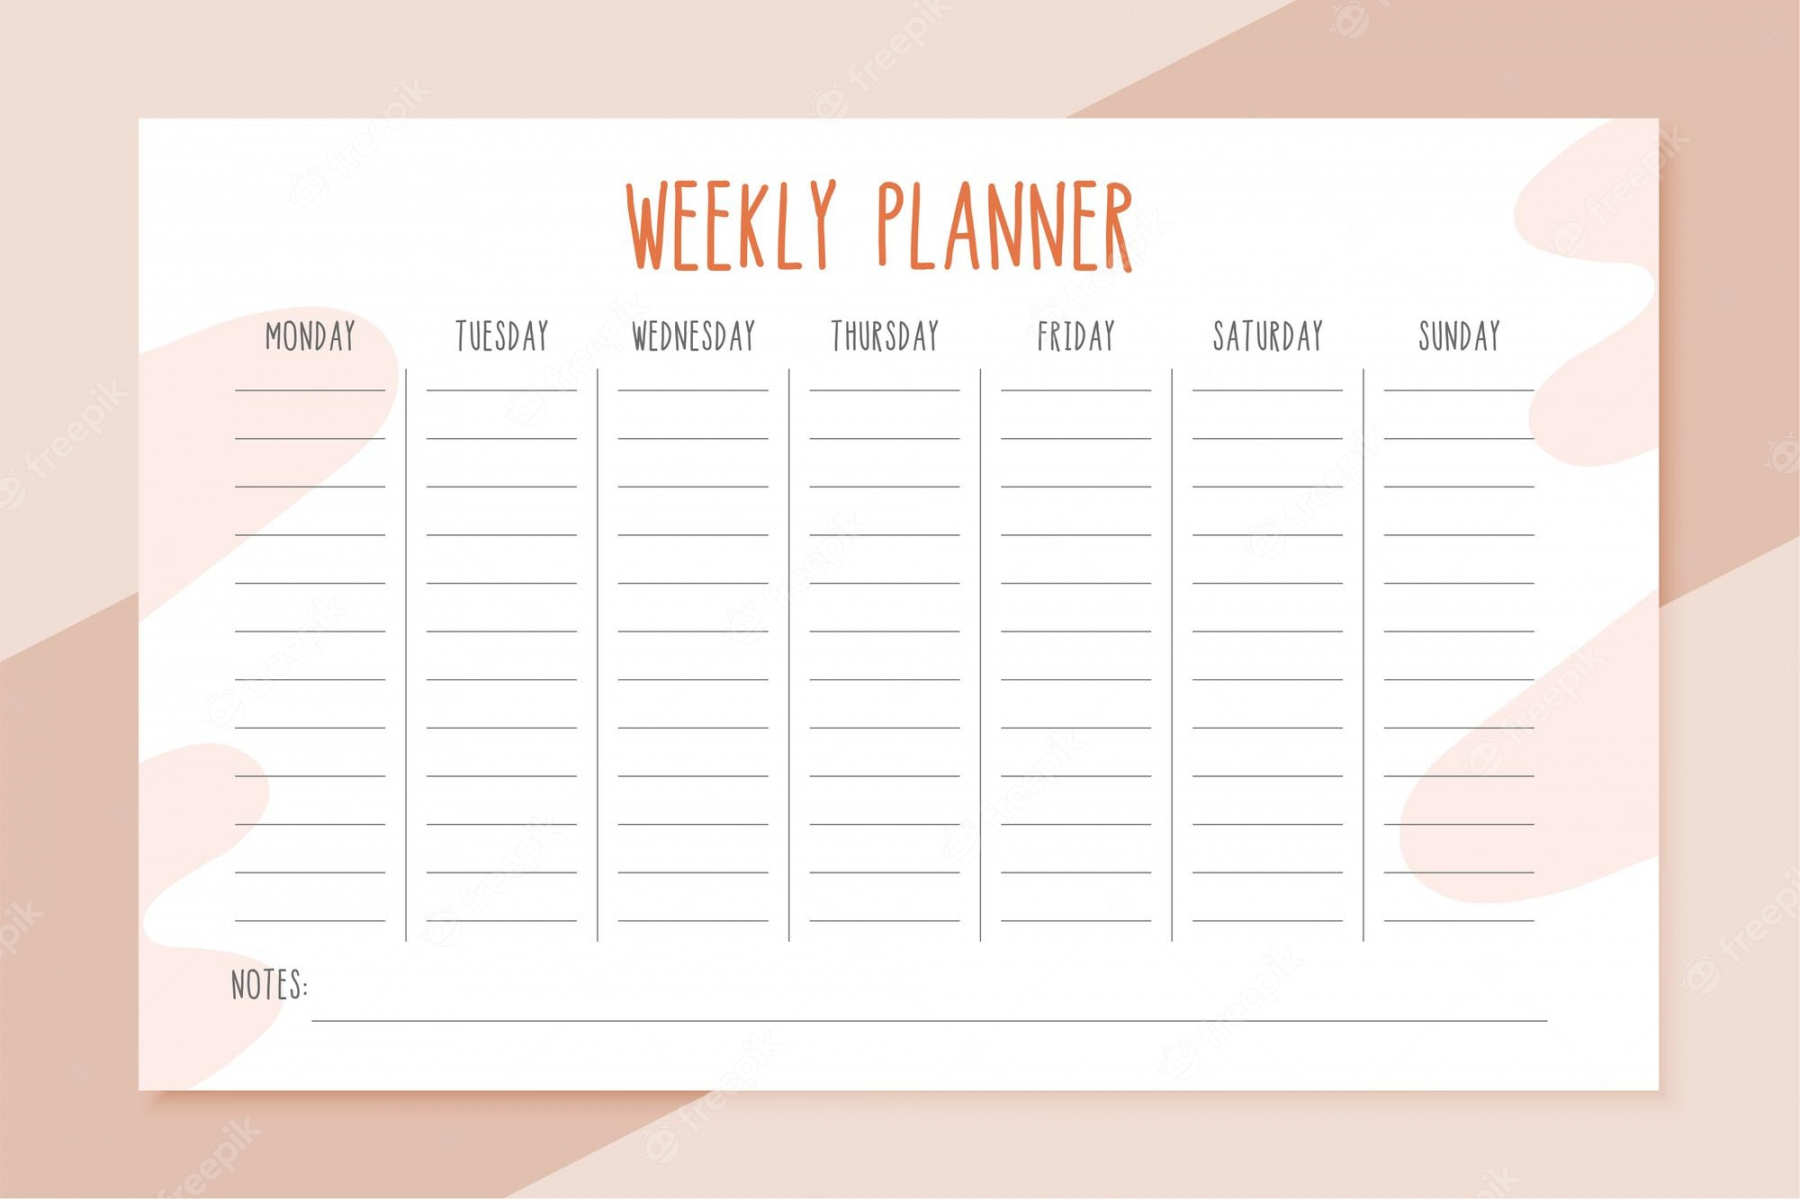 Weekly Planner Template - Free Vectors & PSDs to Download